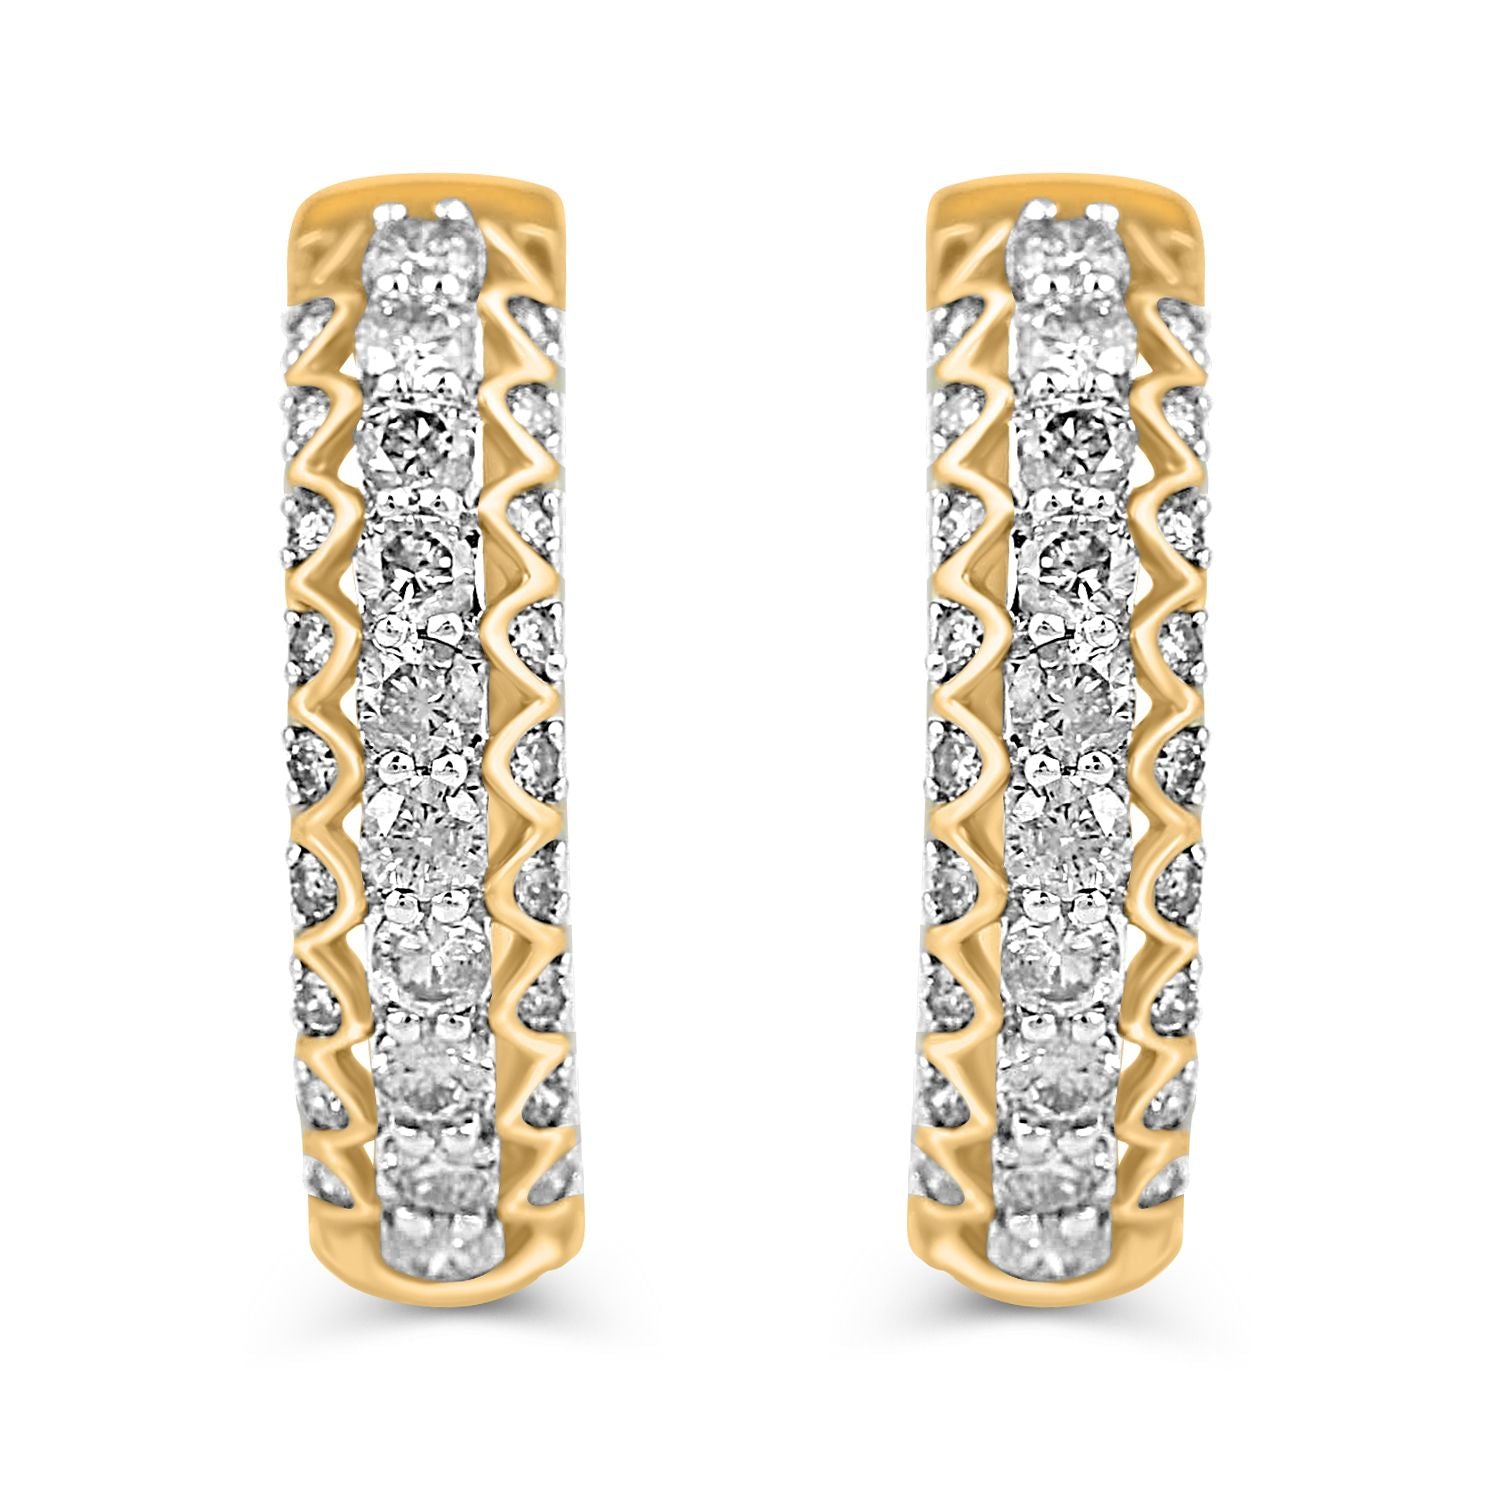 Tanishq Diamond Studs,Hoop earrings starting 20000 rs/- with weight and  price - YouTube